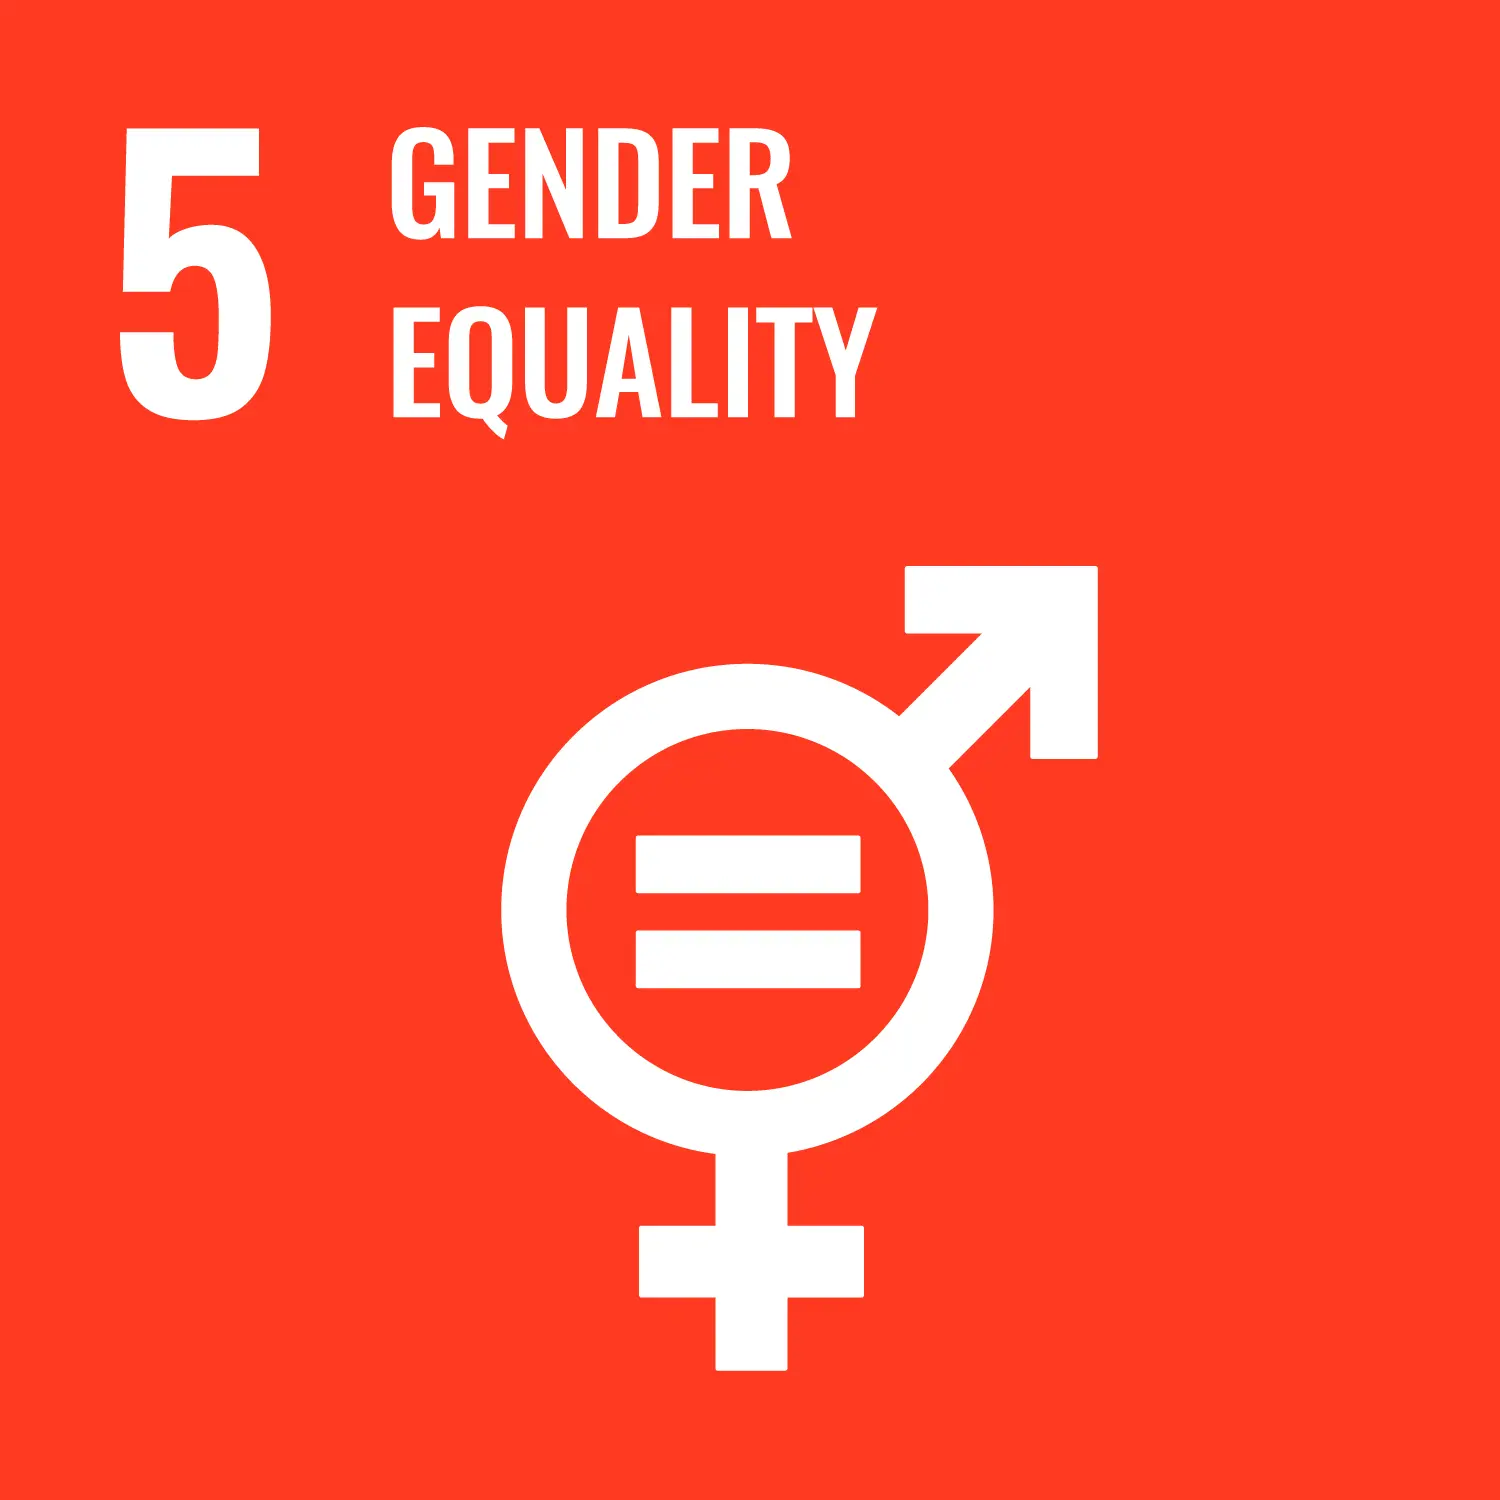 Logo for UN's sustainable development goal number 5